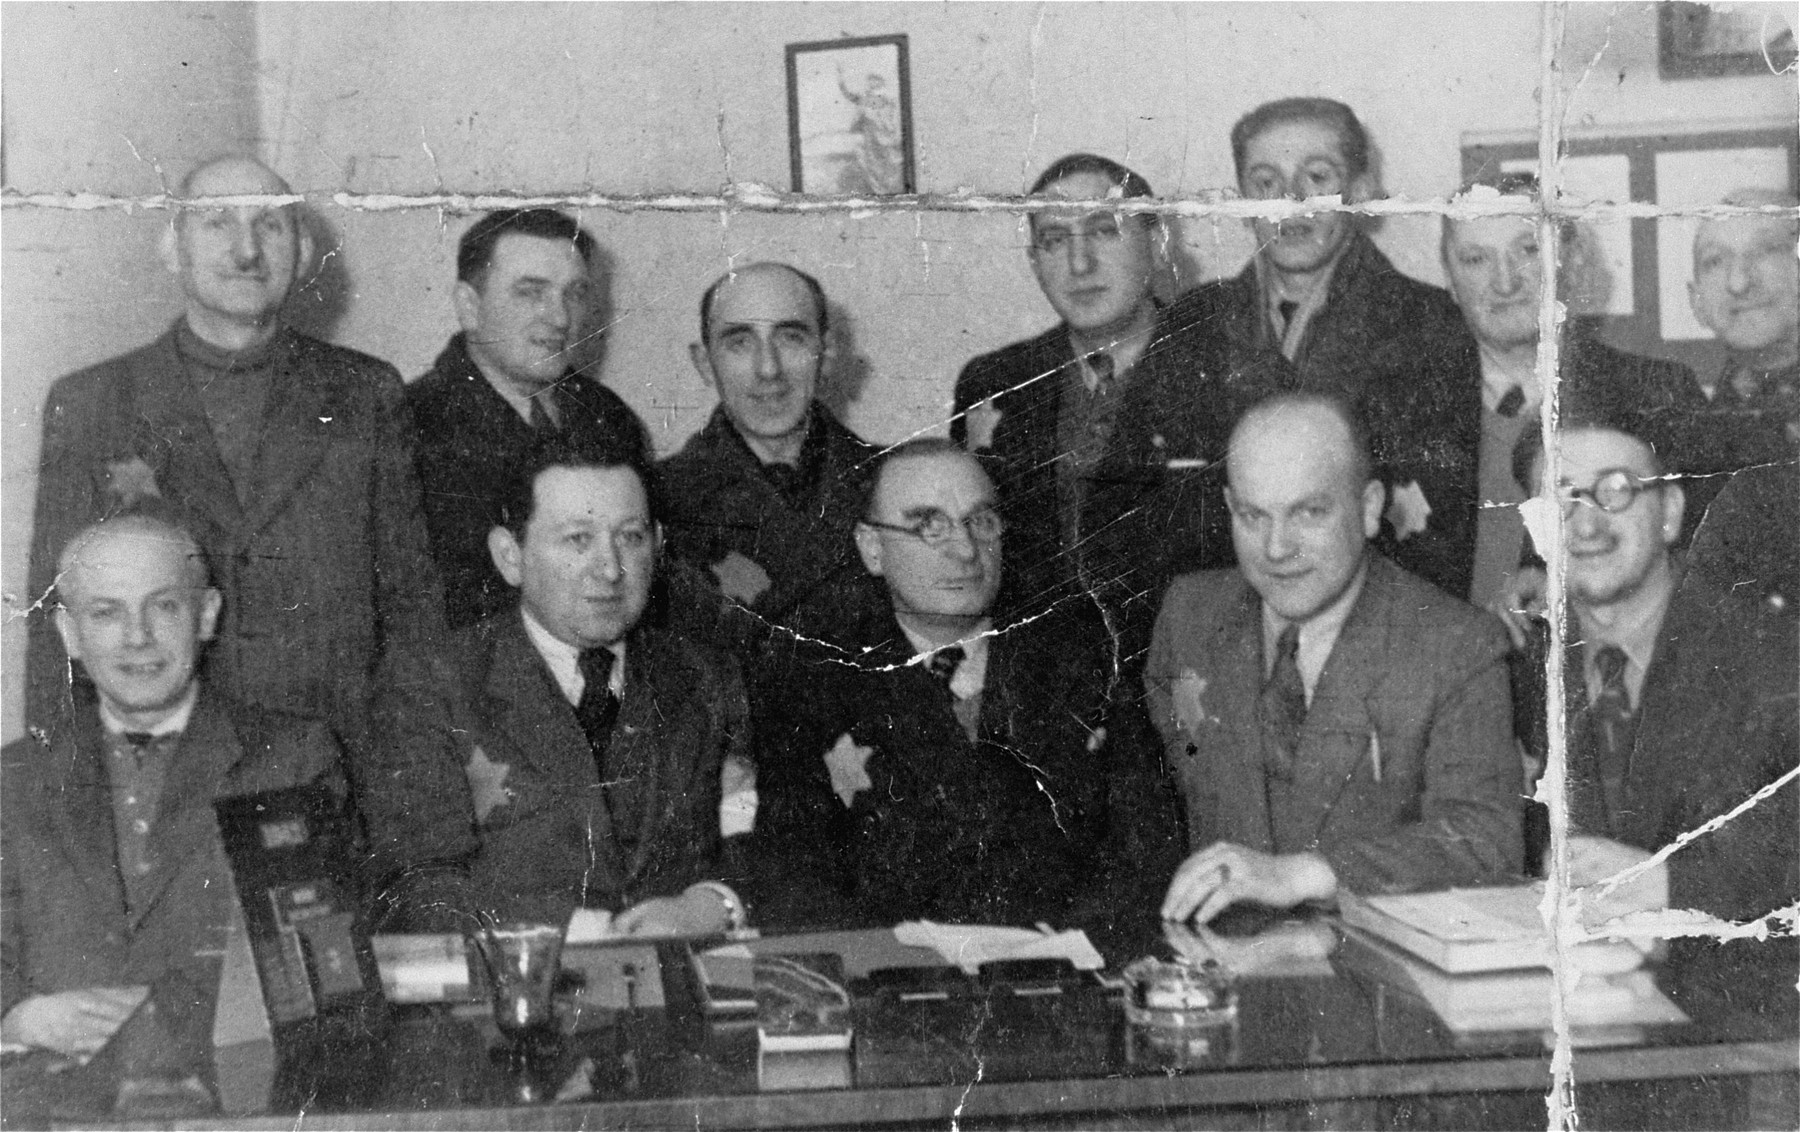 Group portrait of members of the Jewish council in an office in the Lodz ghetto.

Among those pictured are Zygmunt Reingold, director of food supply (seated second from the left) and Max Szczesliwy, co-director (seated in the middle).